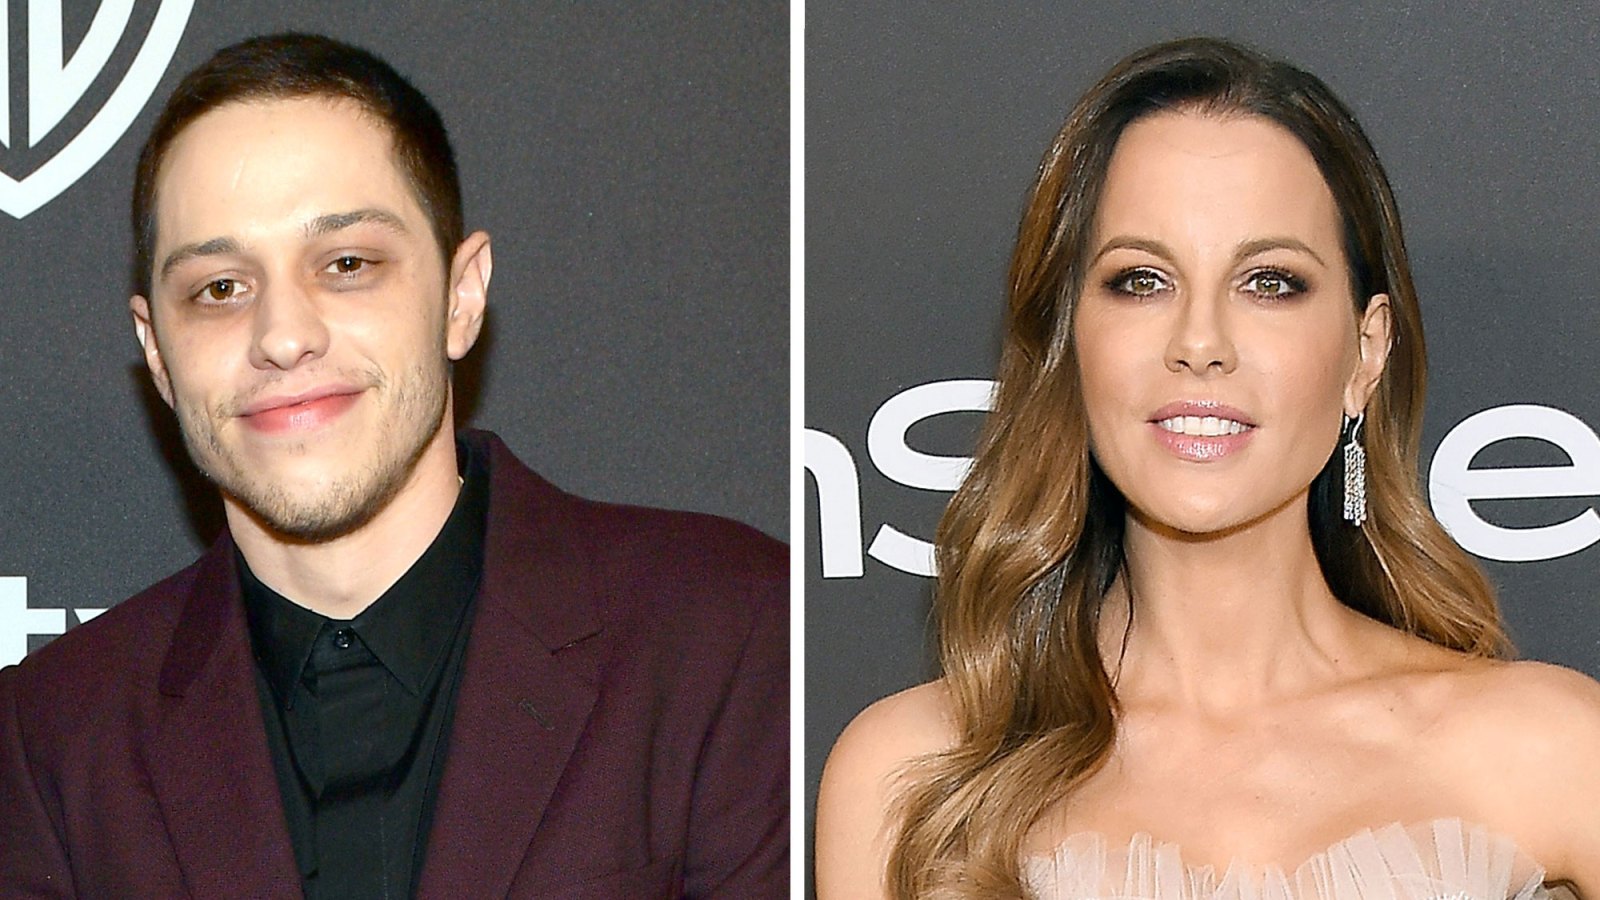 Pete Davidson and Kate Beckinsale Likely Won't Get Too Serious